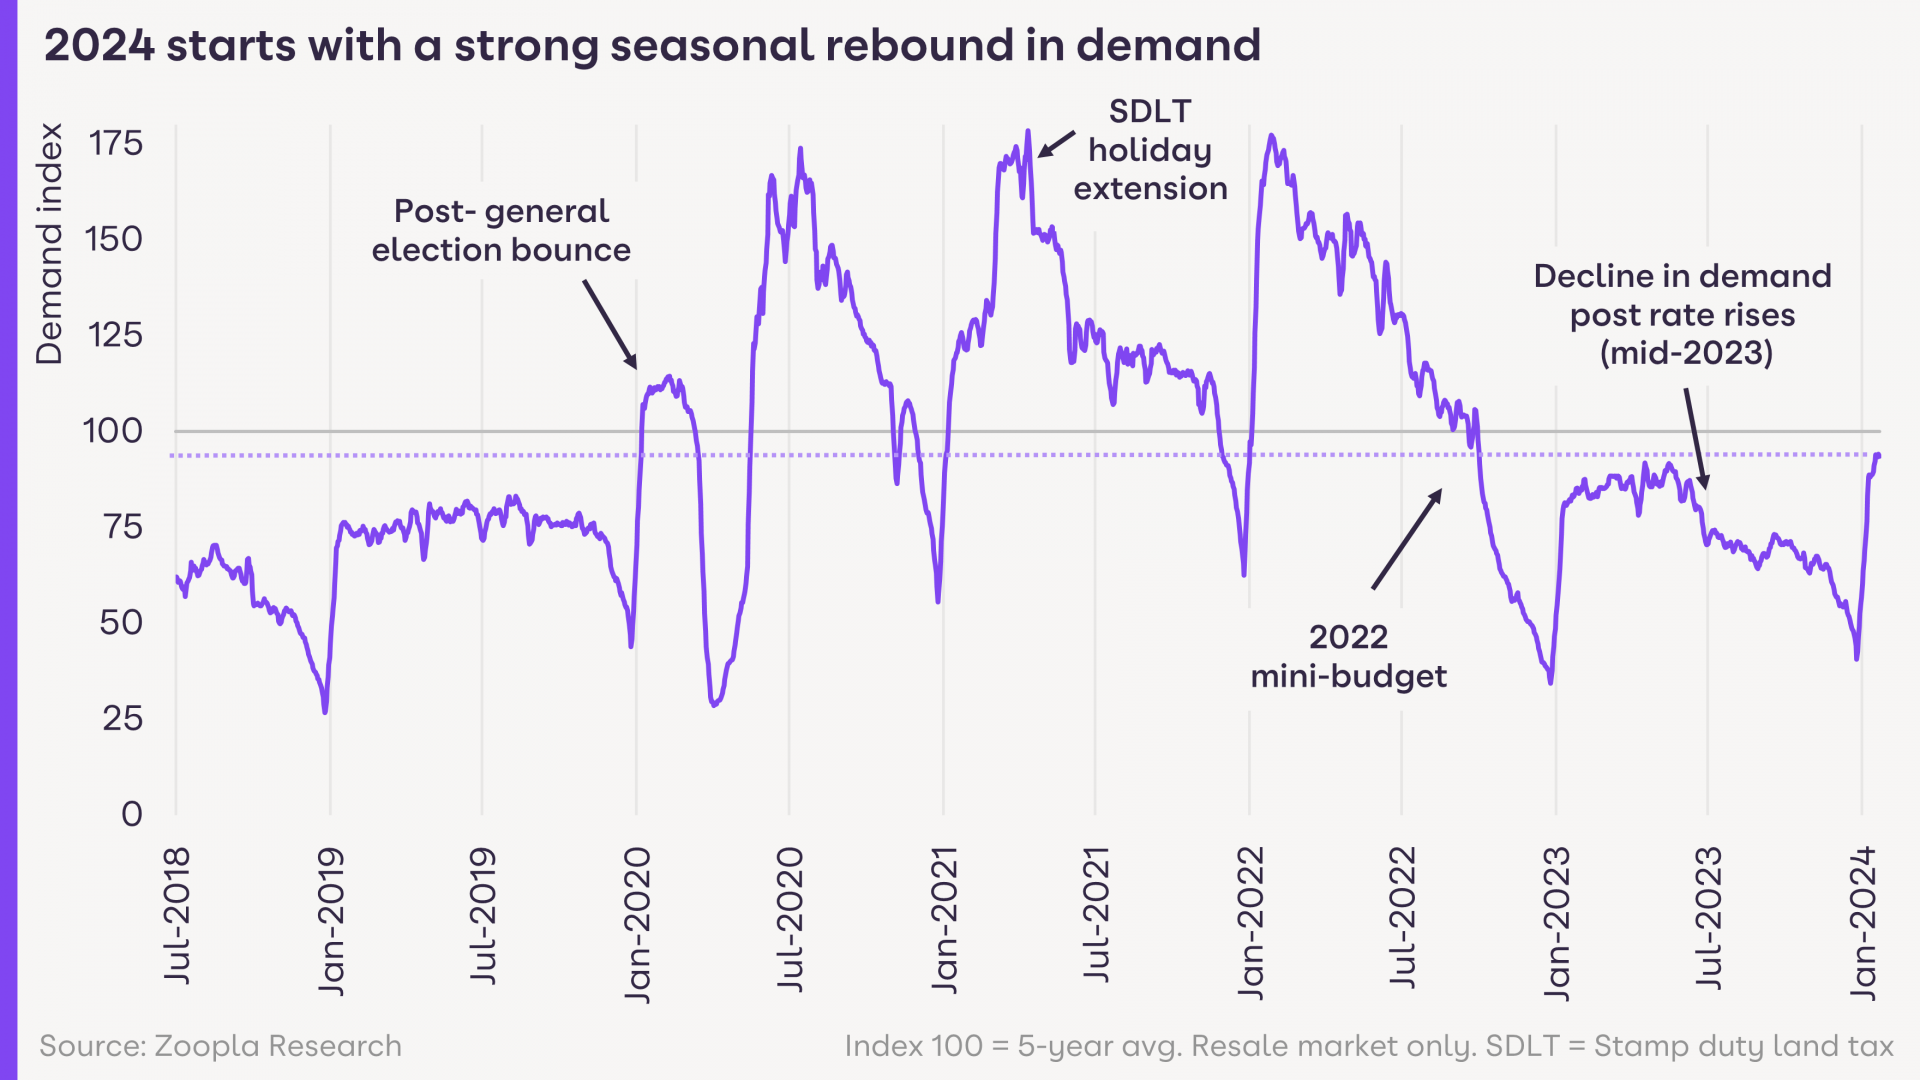 2024 starts with a strong seasonal rebound in demand